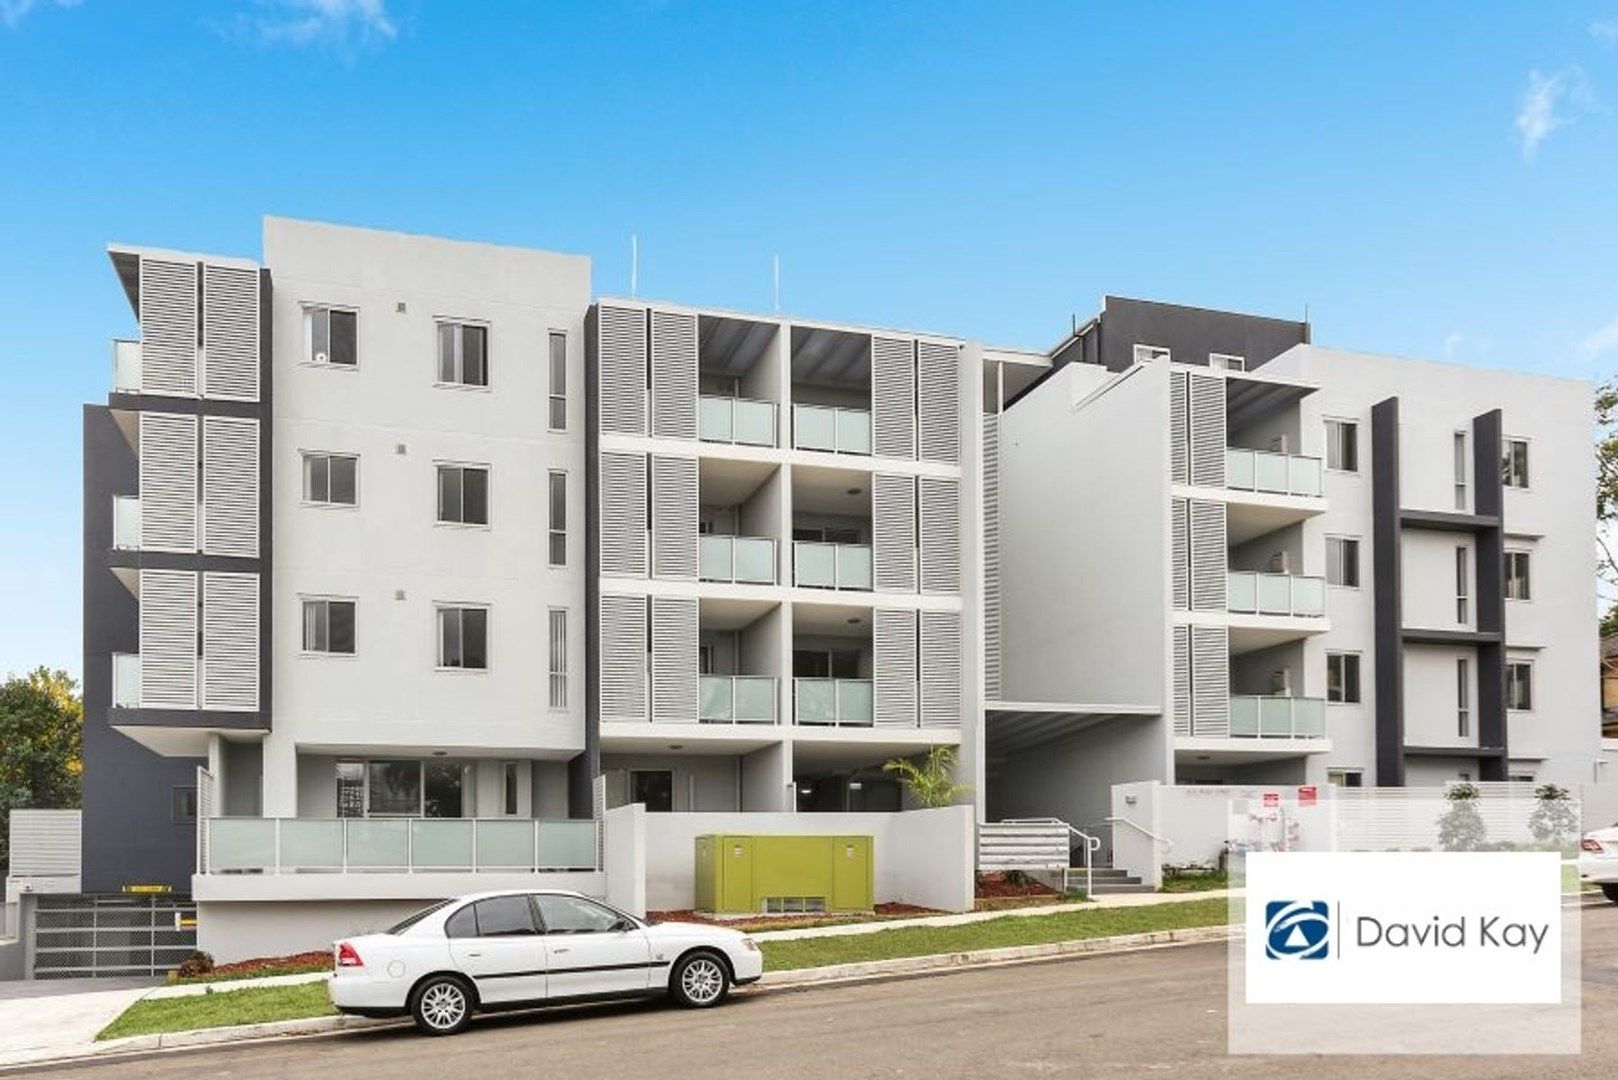 13/14-18 Peggy Street, Mays Hill NSW 2145, Image 0